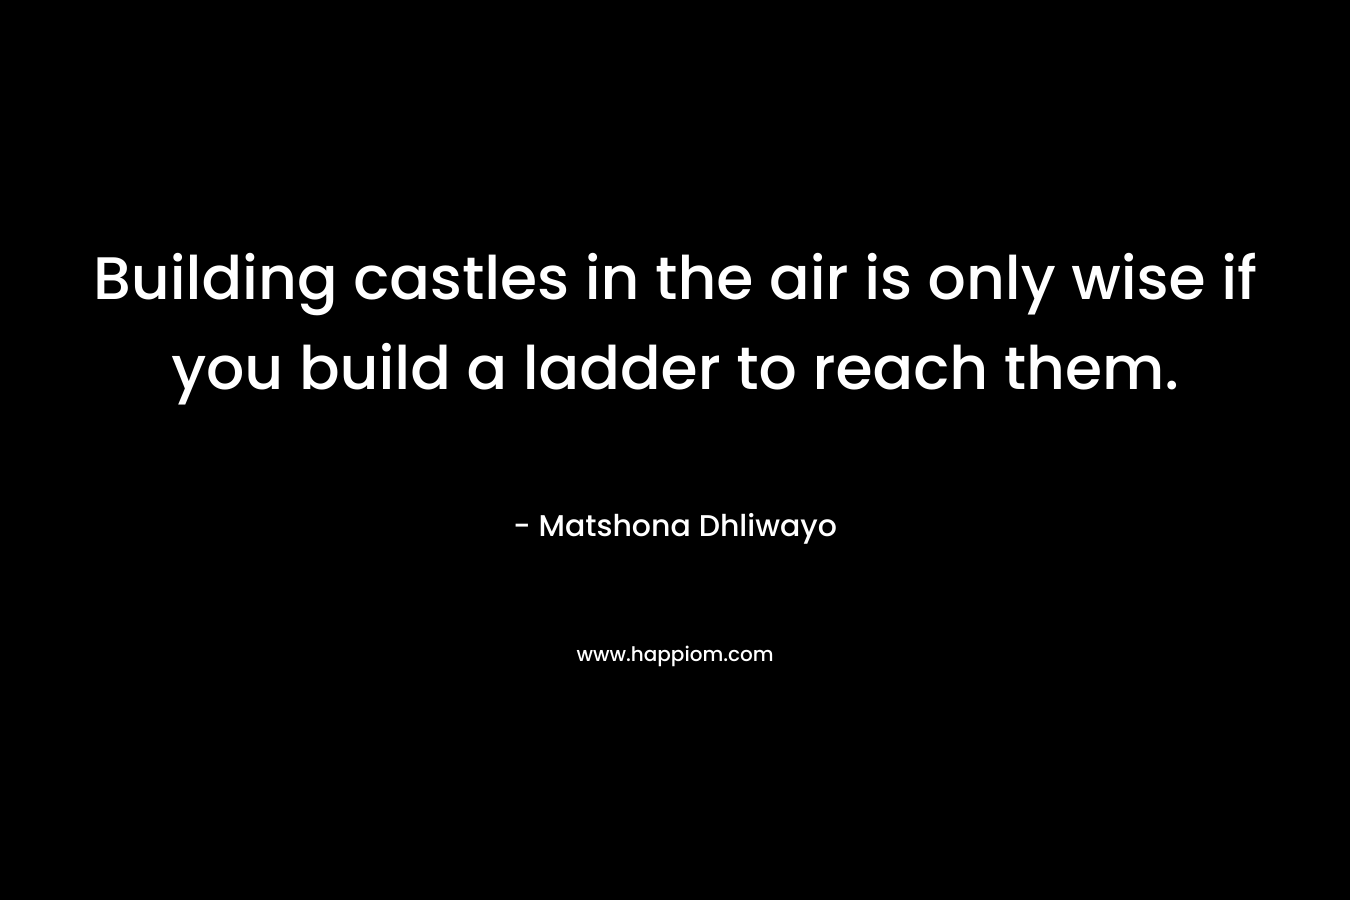 Building castles in the air is only wise if you build a ladder to reach them.